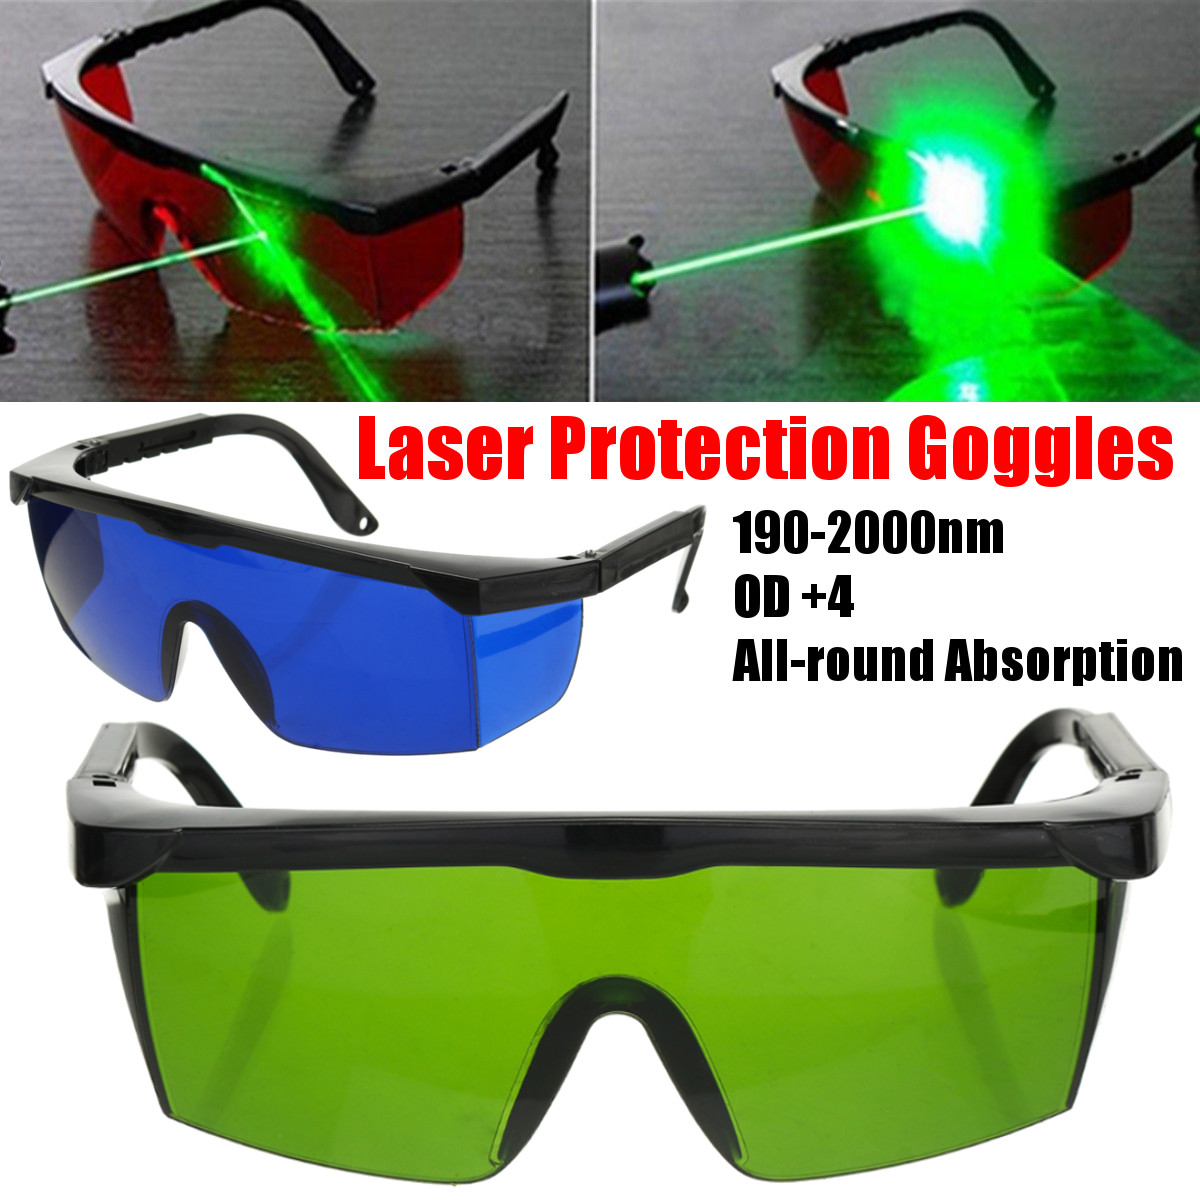 Pro Laser Protection Goggles Protective Safety Glasses IPL OD+4D 190nm-2000nm Laser Goggles 17